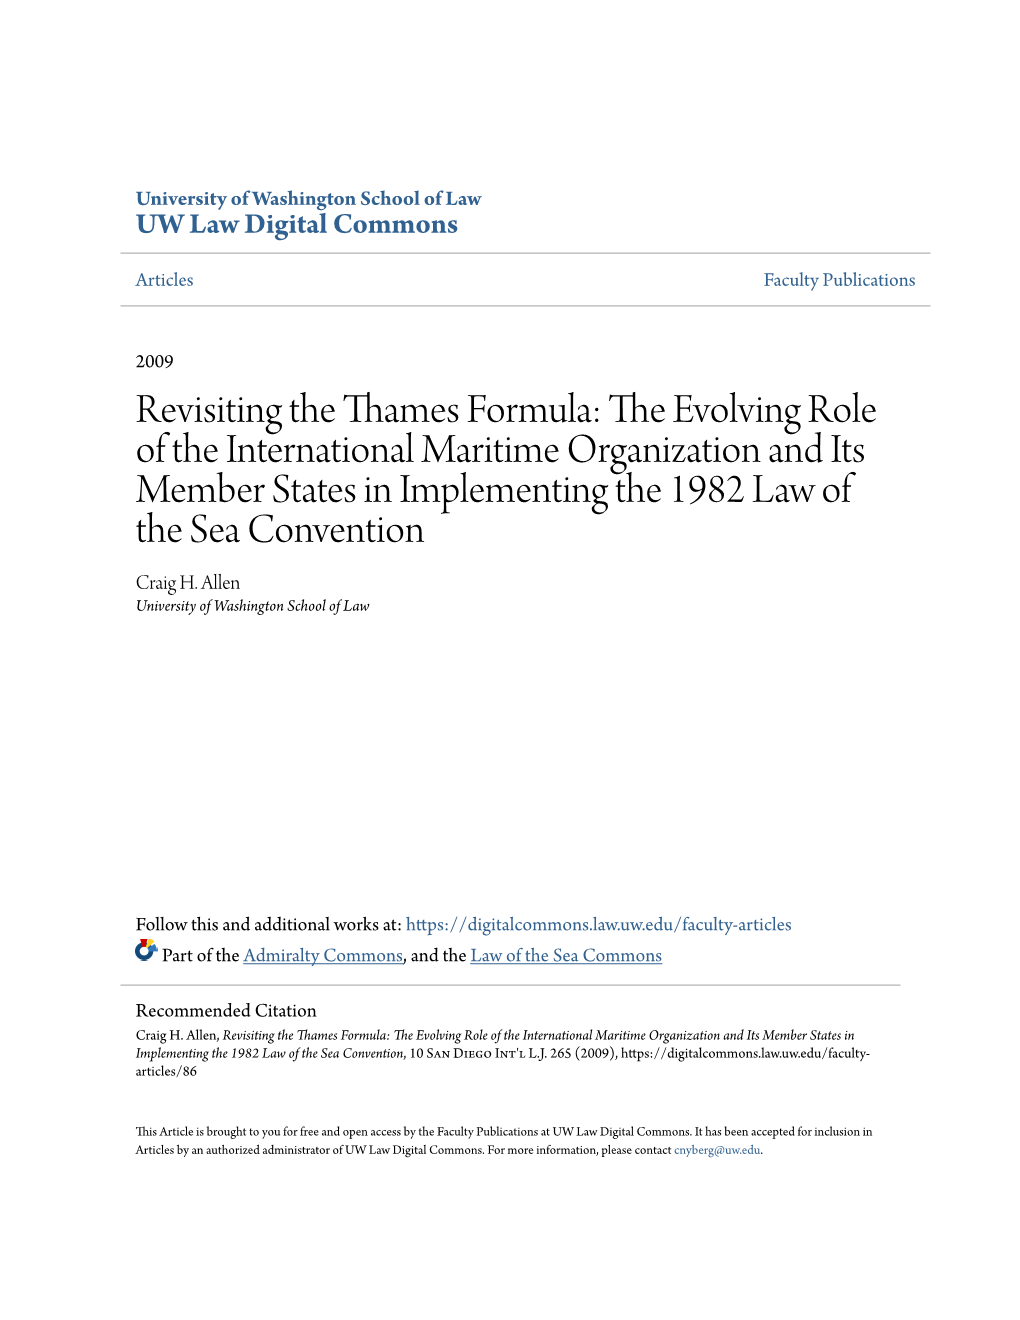 The Evolving Role of the International Maritime Organization and Its Member States in Implementing the 1982 Law of the Sea Convention, 10 San Diego Int'l L.J